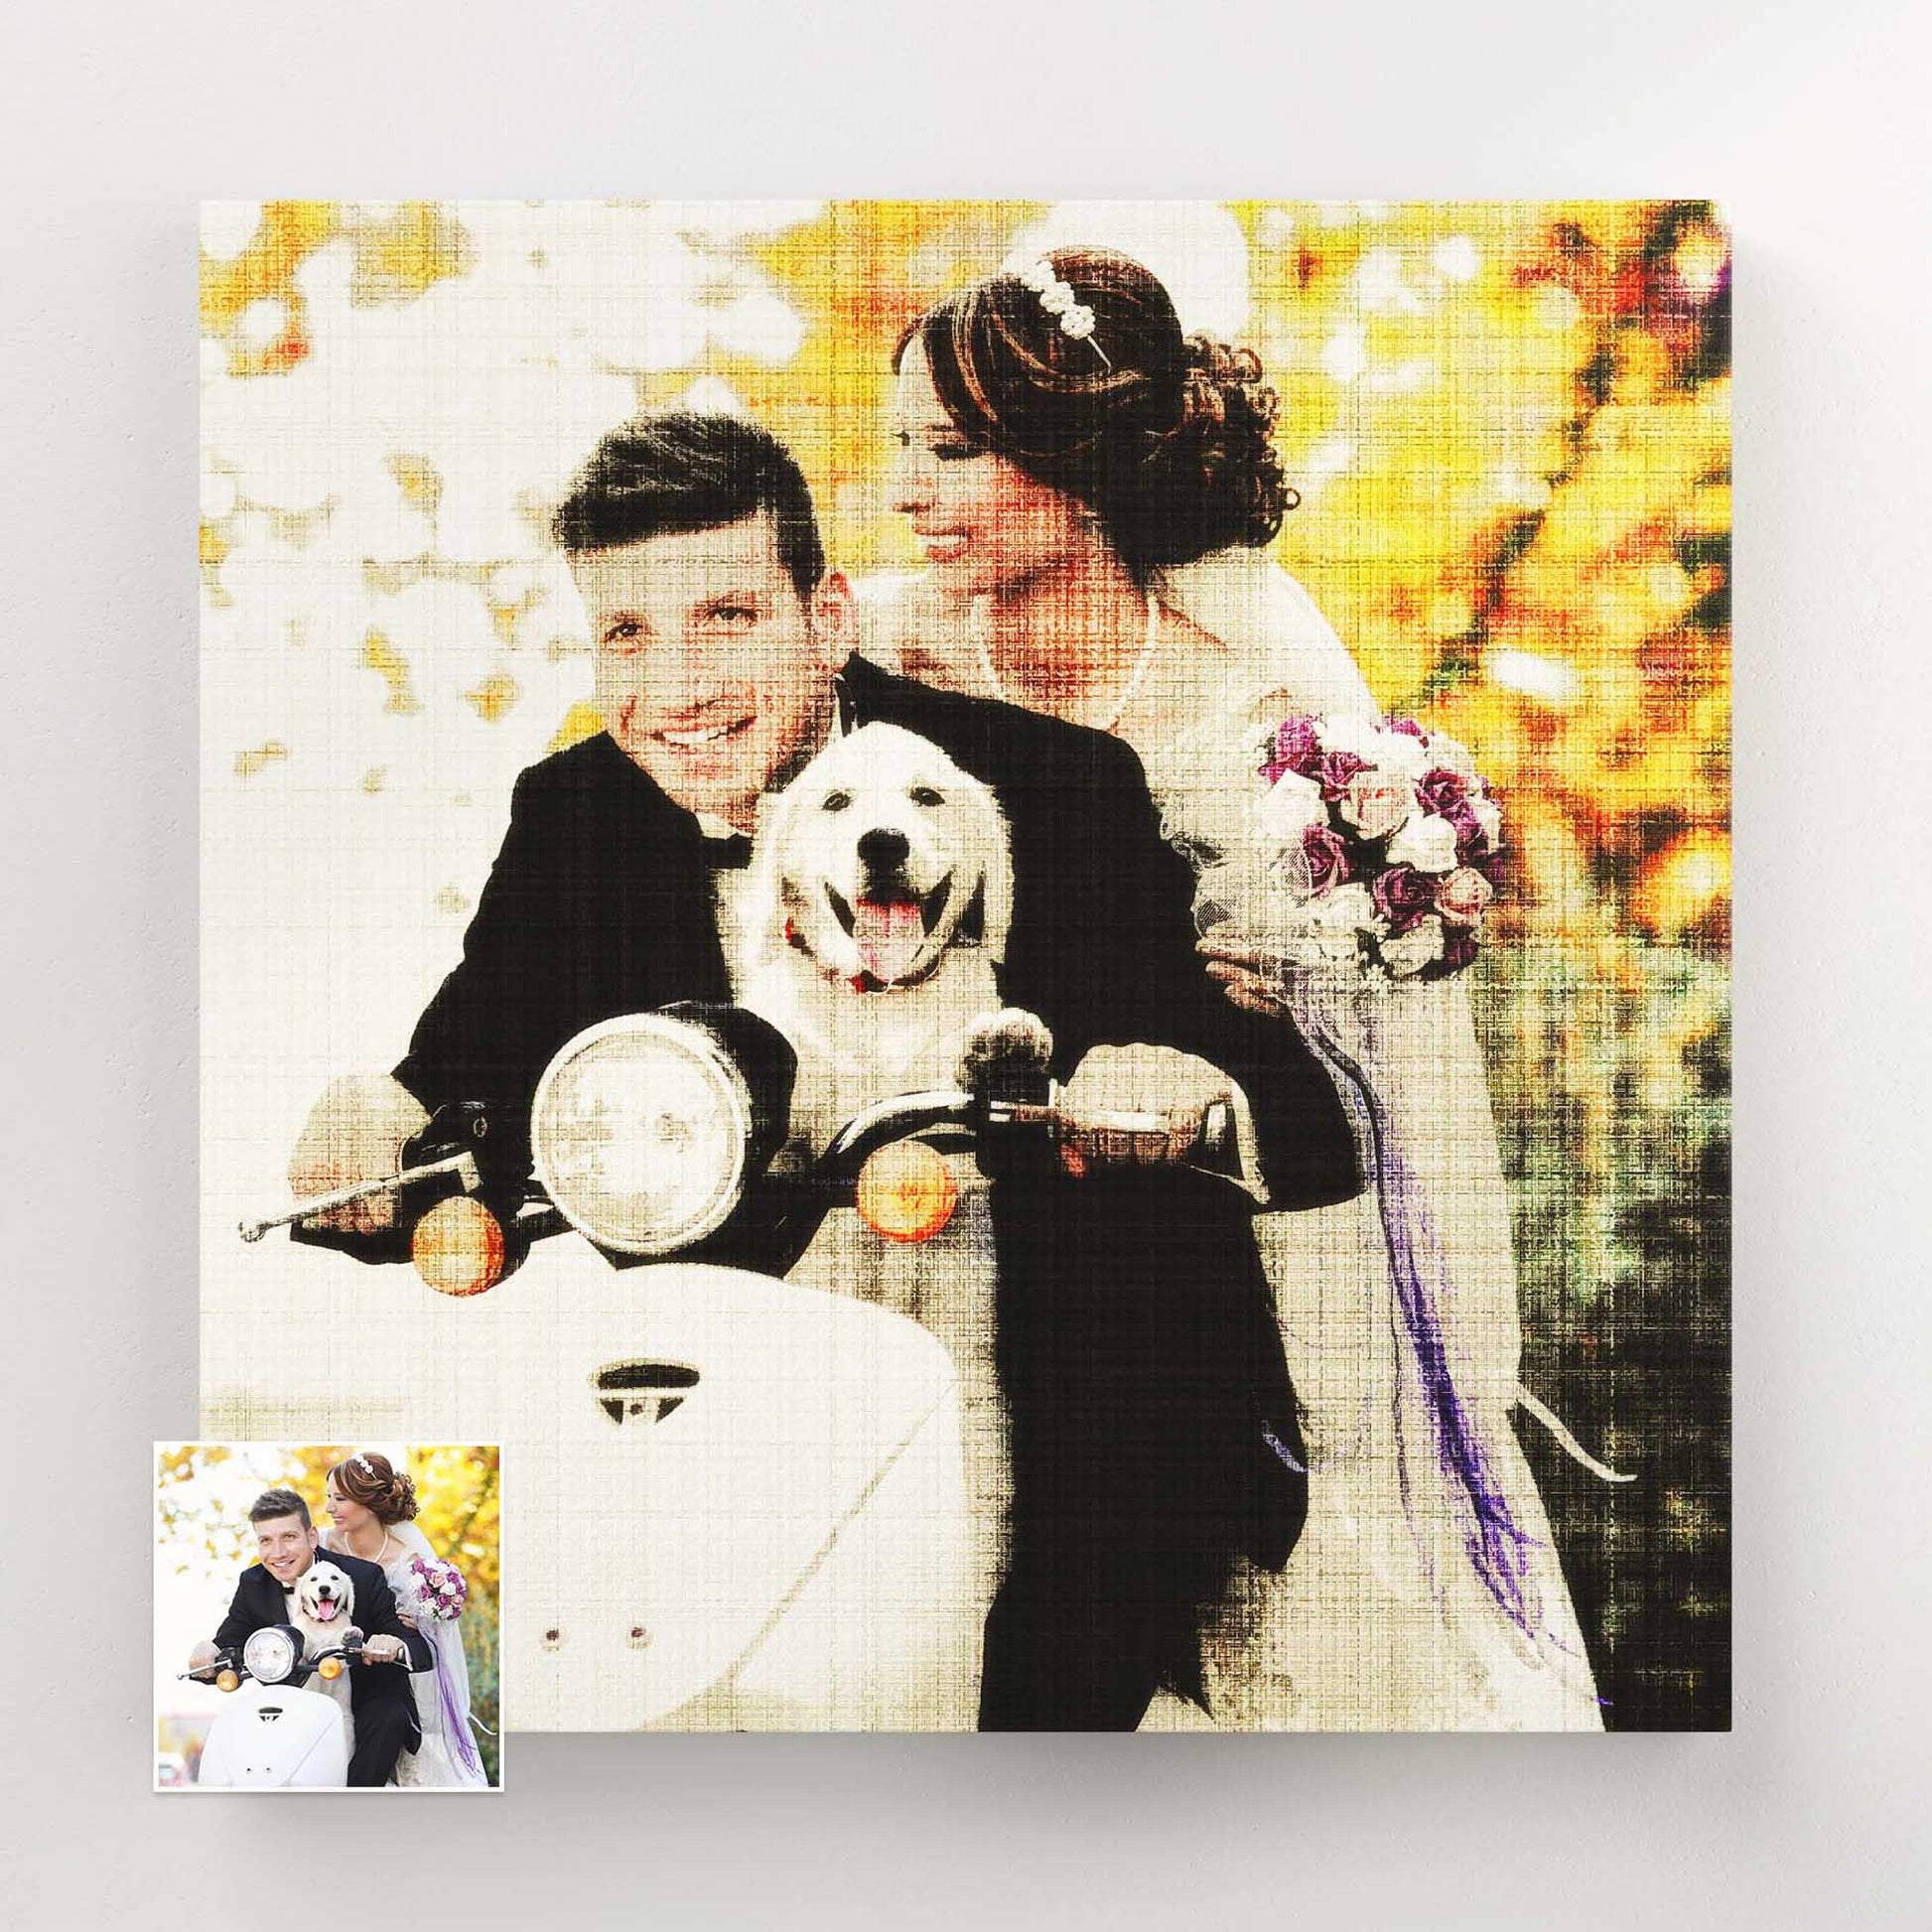 Immortalize cherished memories with a Personalised Fabric Texture Canvas. This canvas is created through painting from your photo, resulting in an original and unique artwork. Its fine art quality makes it a perfect choice for weddings